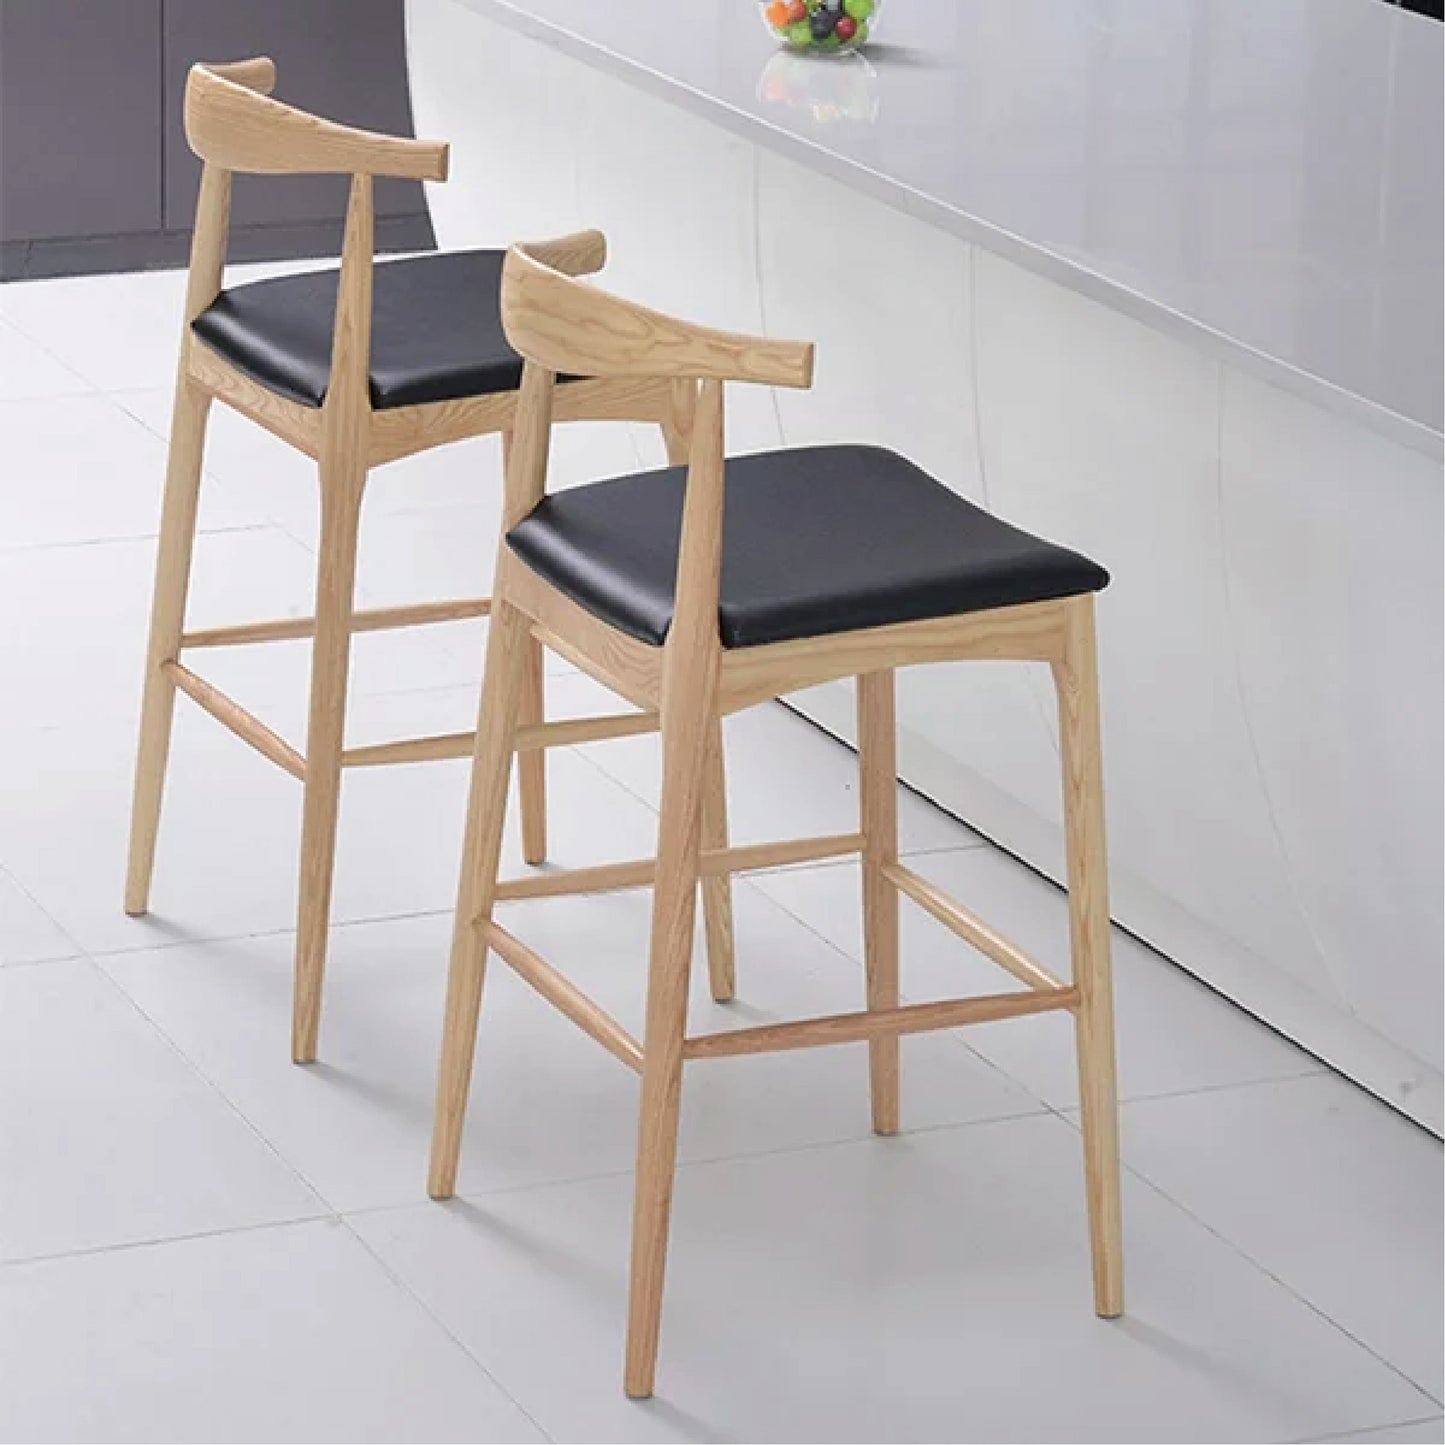 Elton Bar Stool Solid Wood Bar Stools (Set of Two) – Made to Order